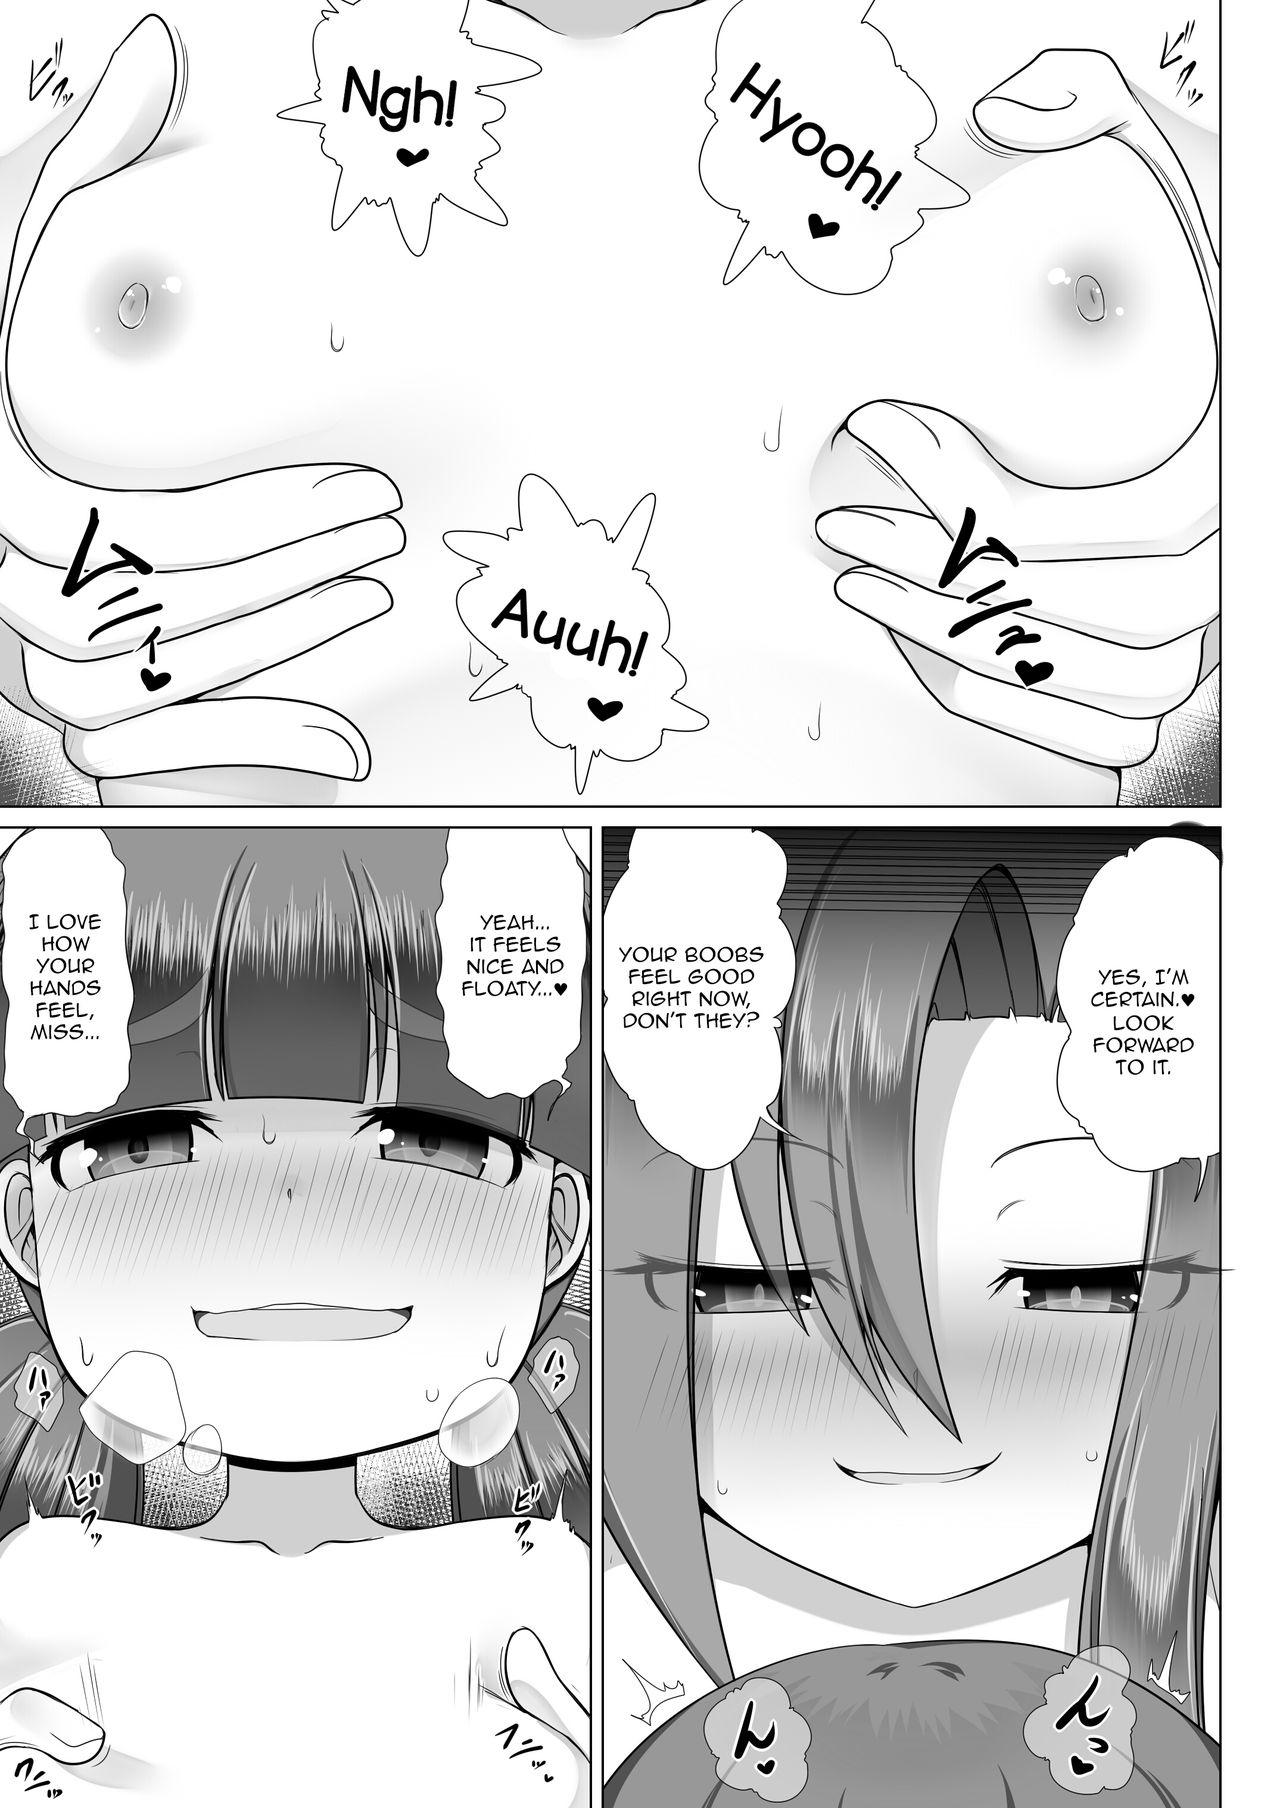 Pussy Play Lolicon Les Succubus wa Midara na Slow Life o Mankitsu Suru | The Leisurely Lewd Life of a Lesbian Lolicon Succubus Gay Blondhair - Page 9